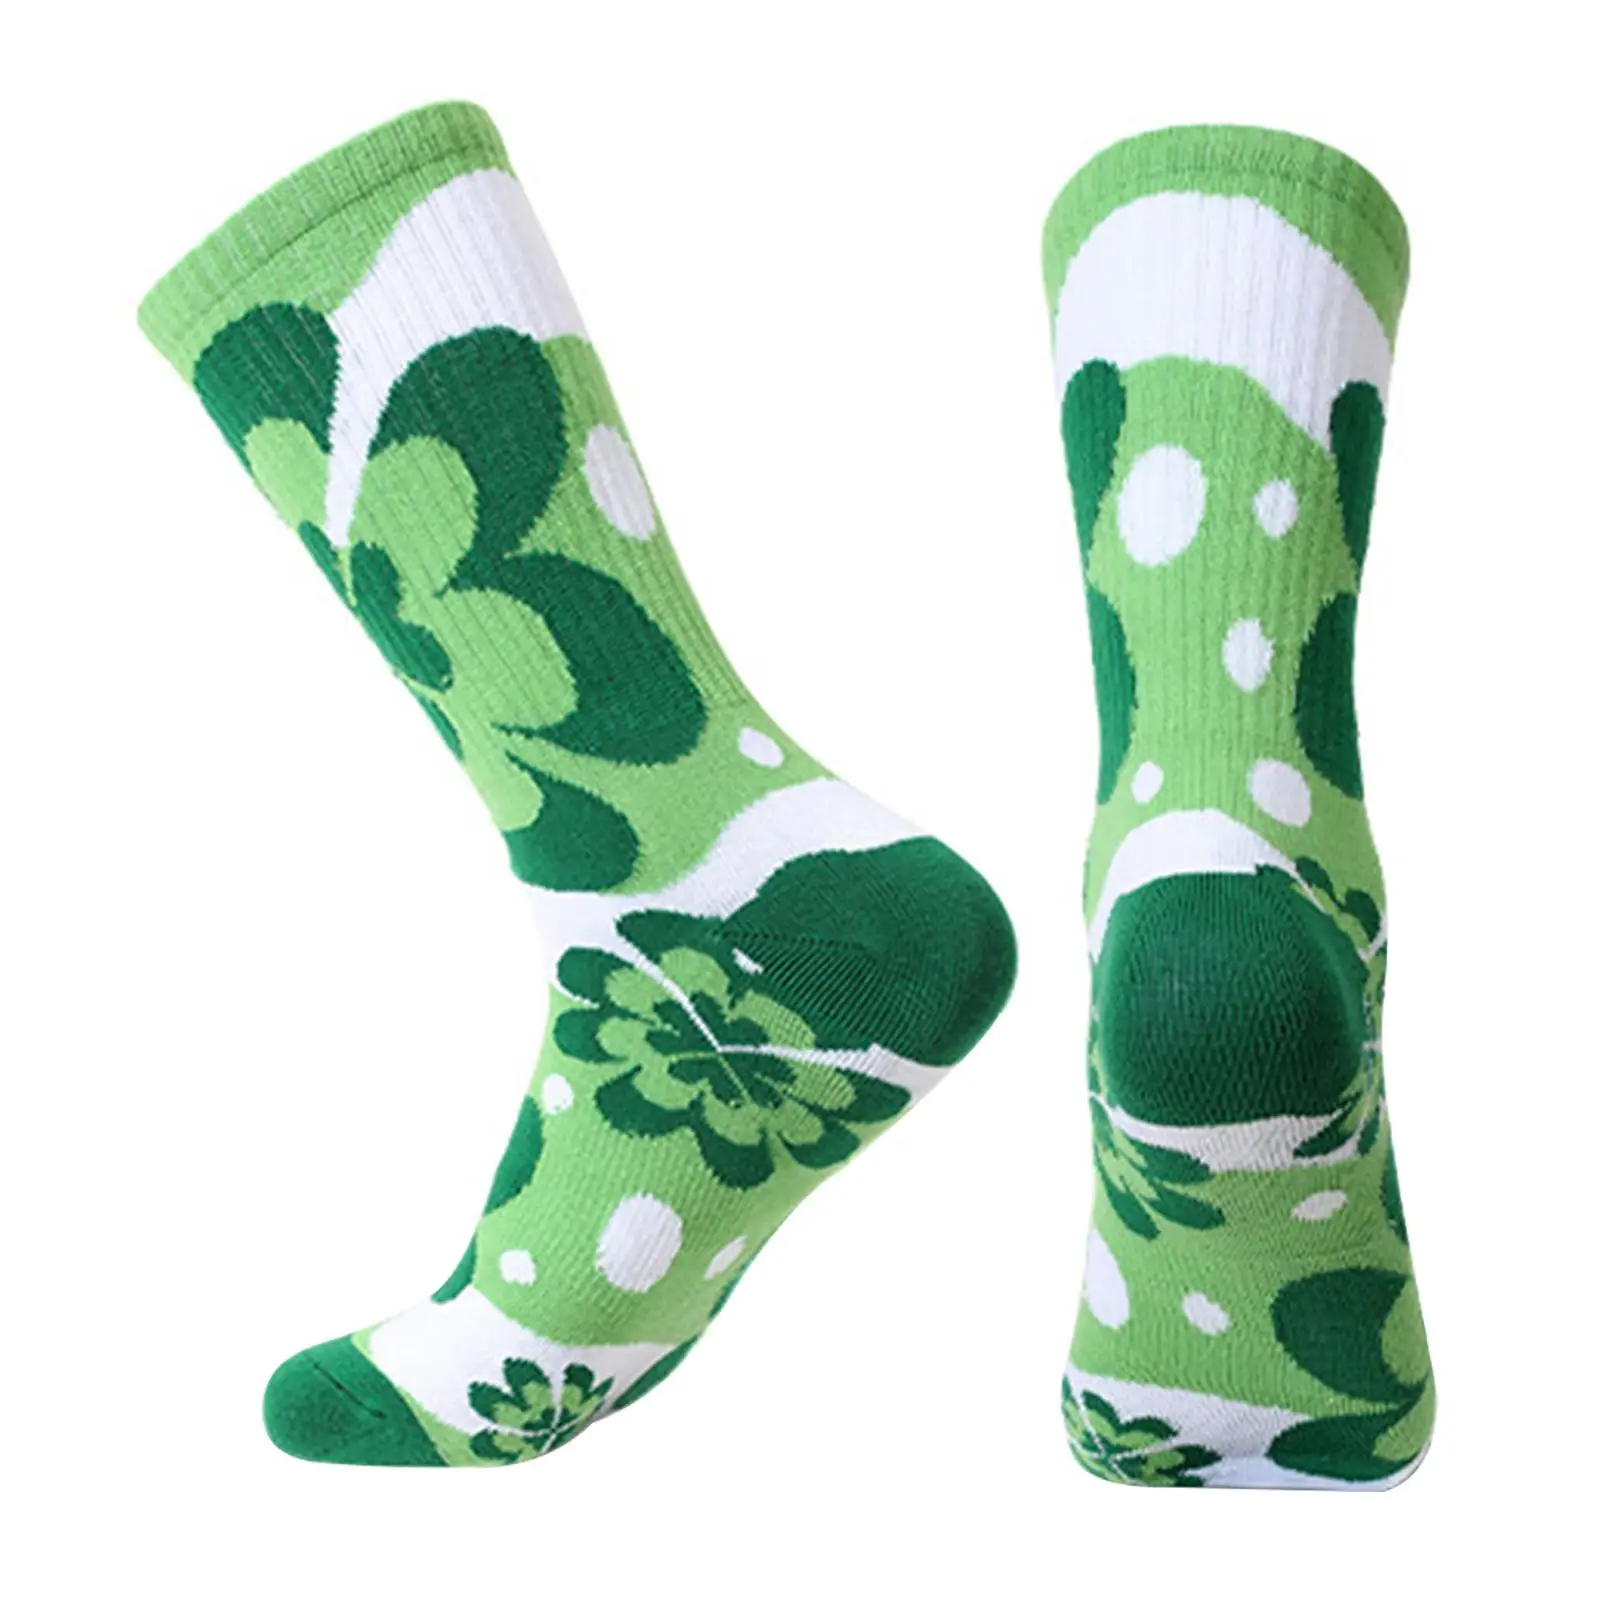 Colorful Patterned Crew Socks Novelty Casual Fashionable Dress Socks for Cycling